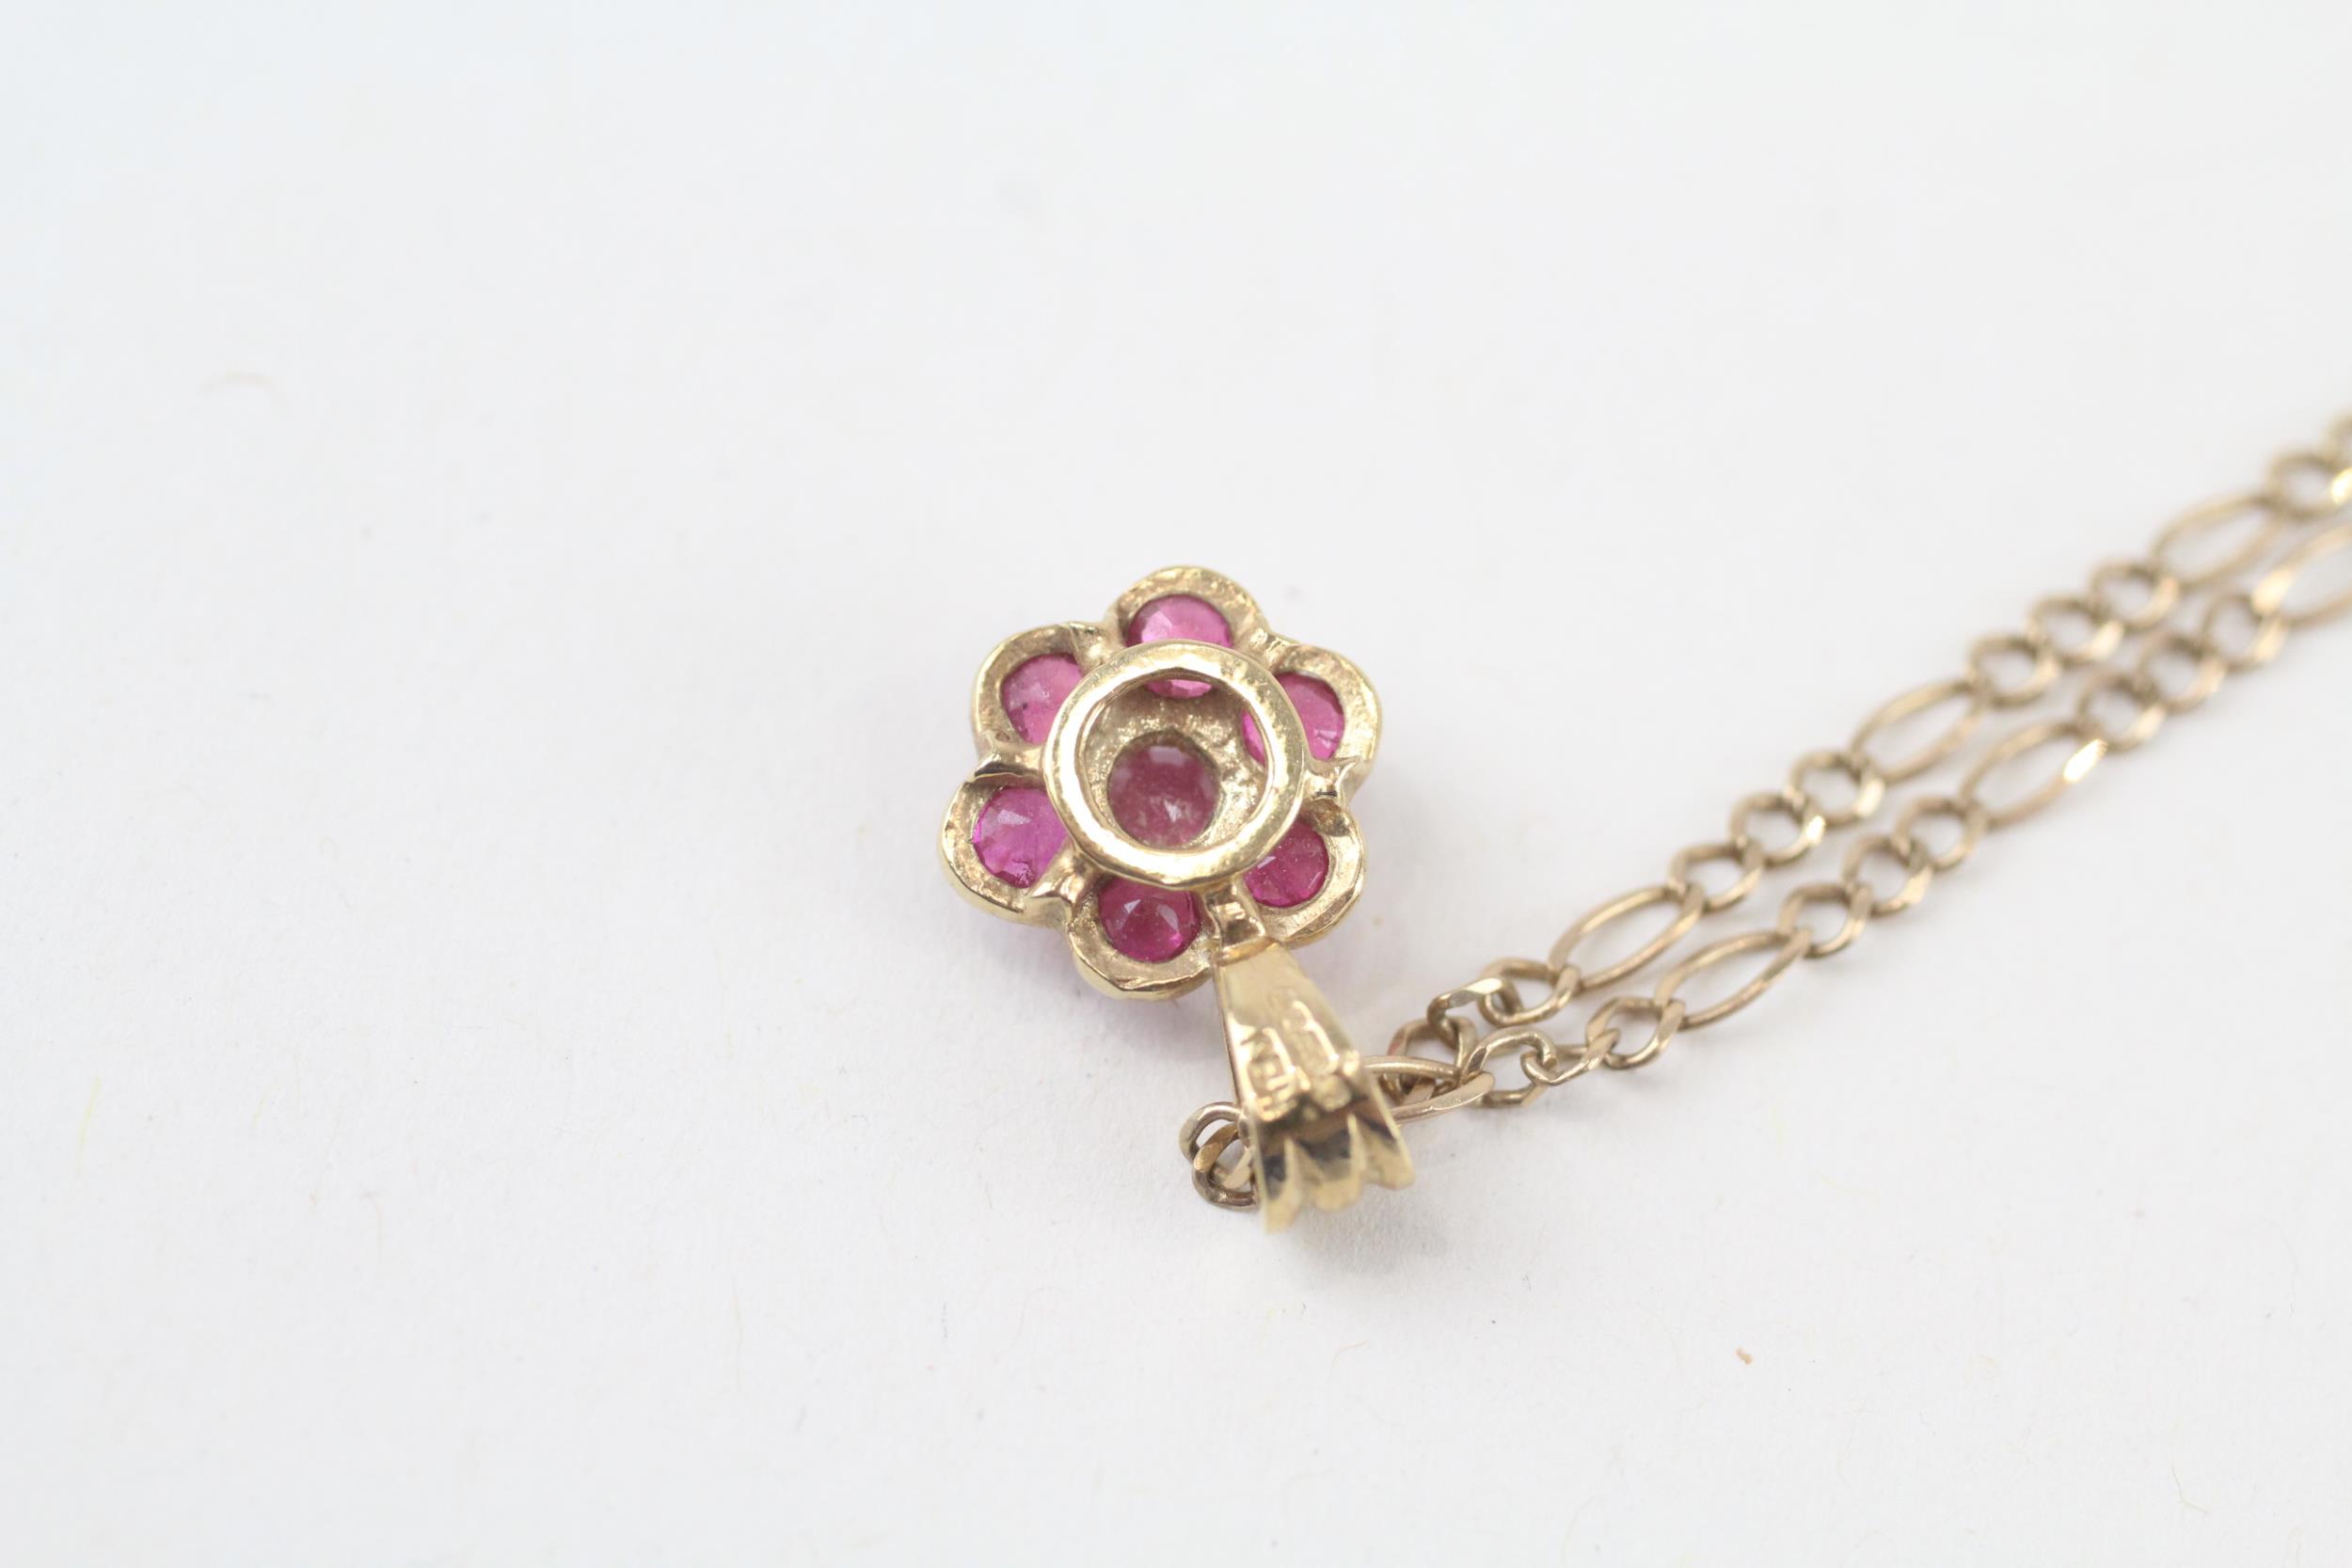 9ct gold vintage ruby cluster pendant necklace (2.5g) - Image 4 of 4